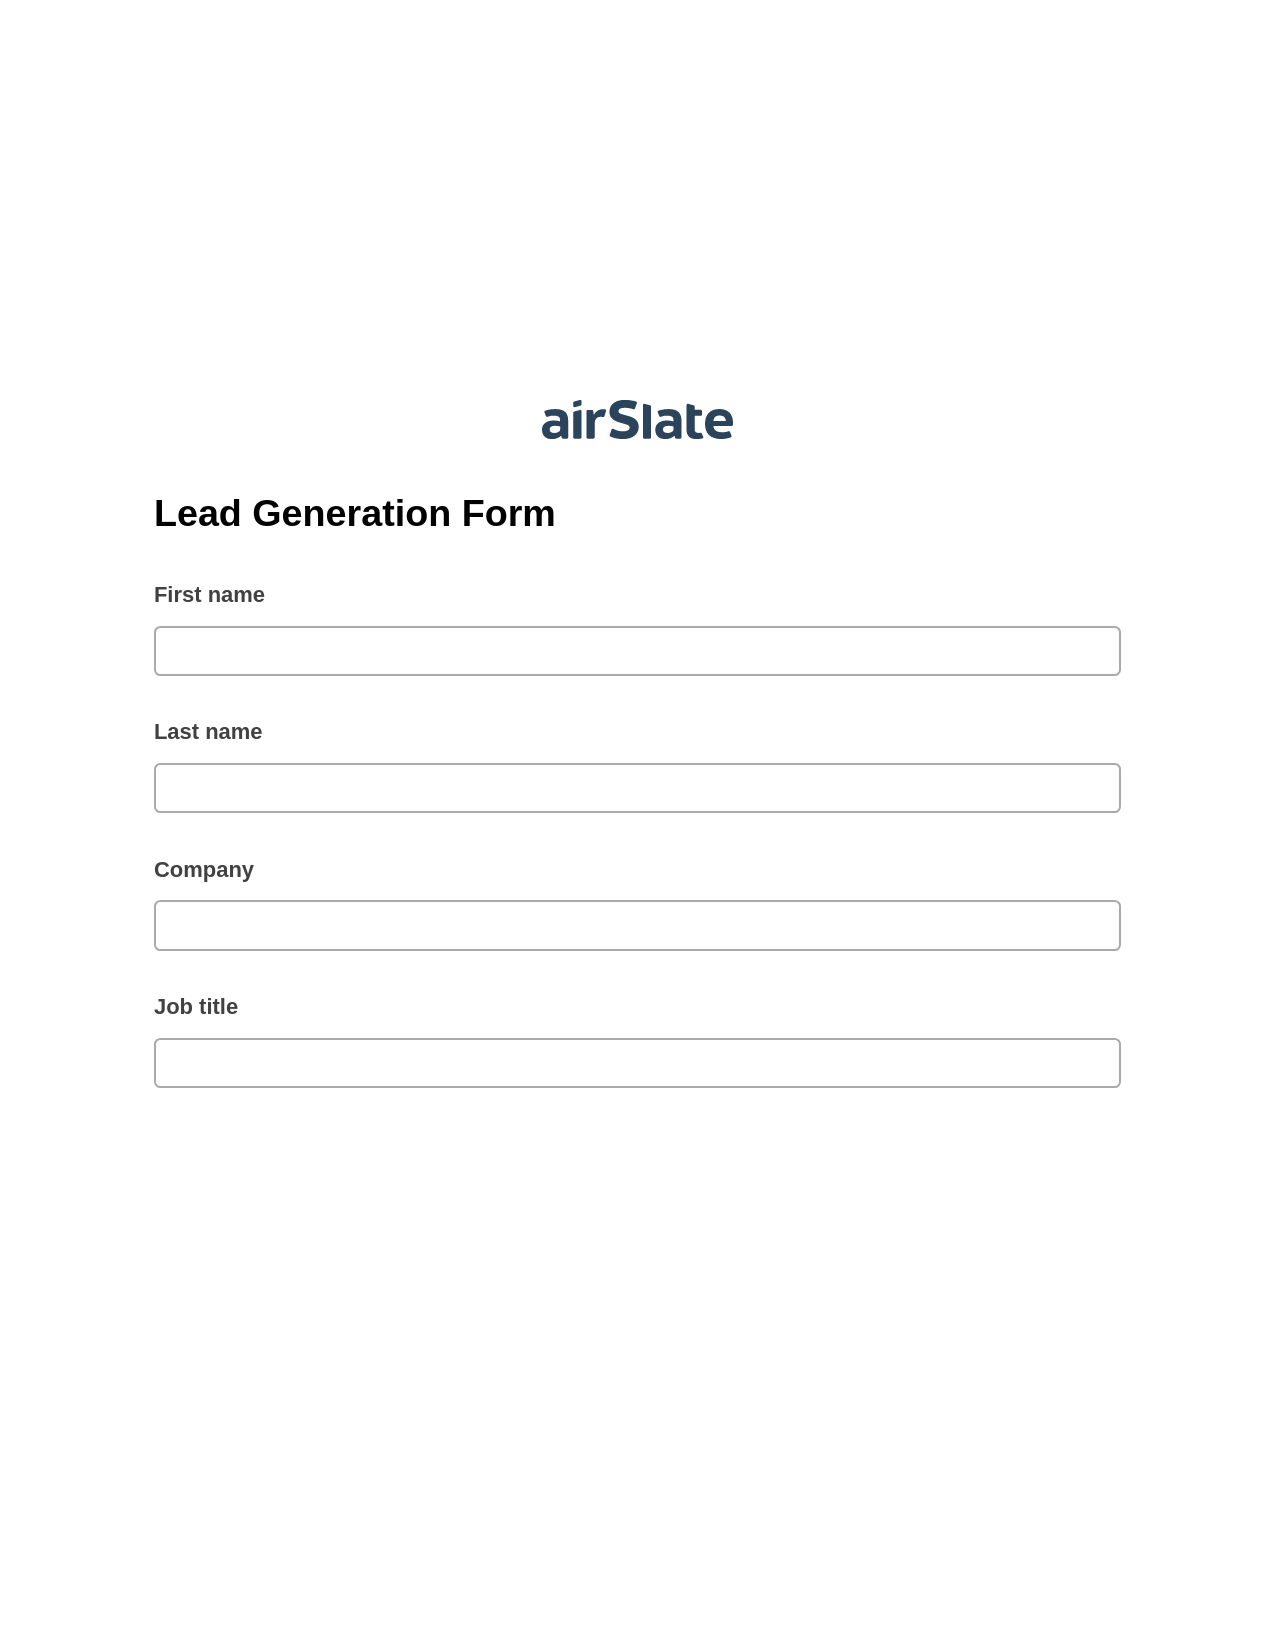 Lead Generation Form Pre-fill from CSV File Bot, Roles Reminder Bot, Slack Two-Way Binding Bot